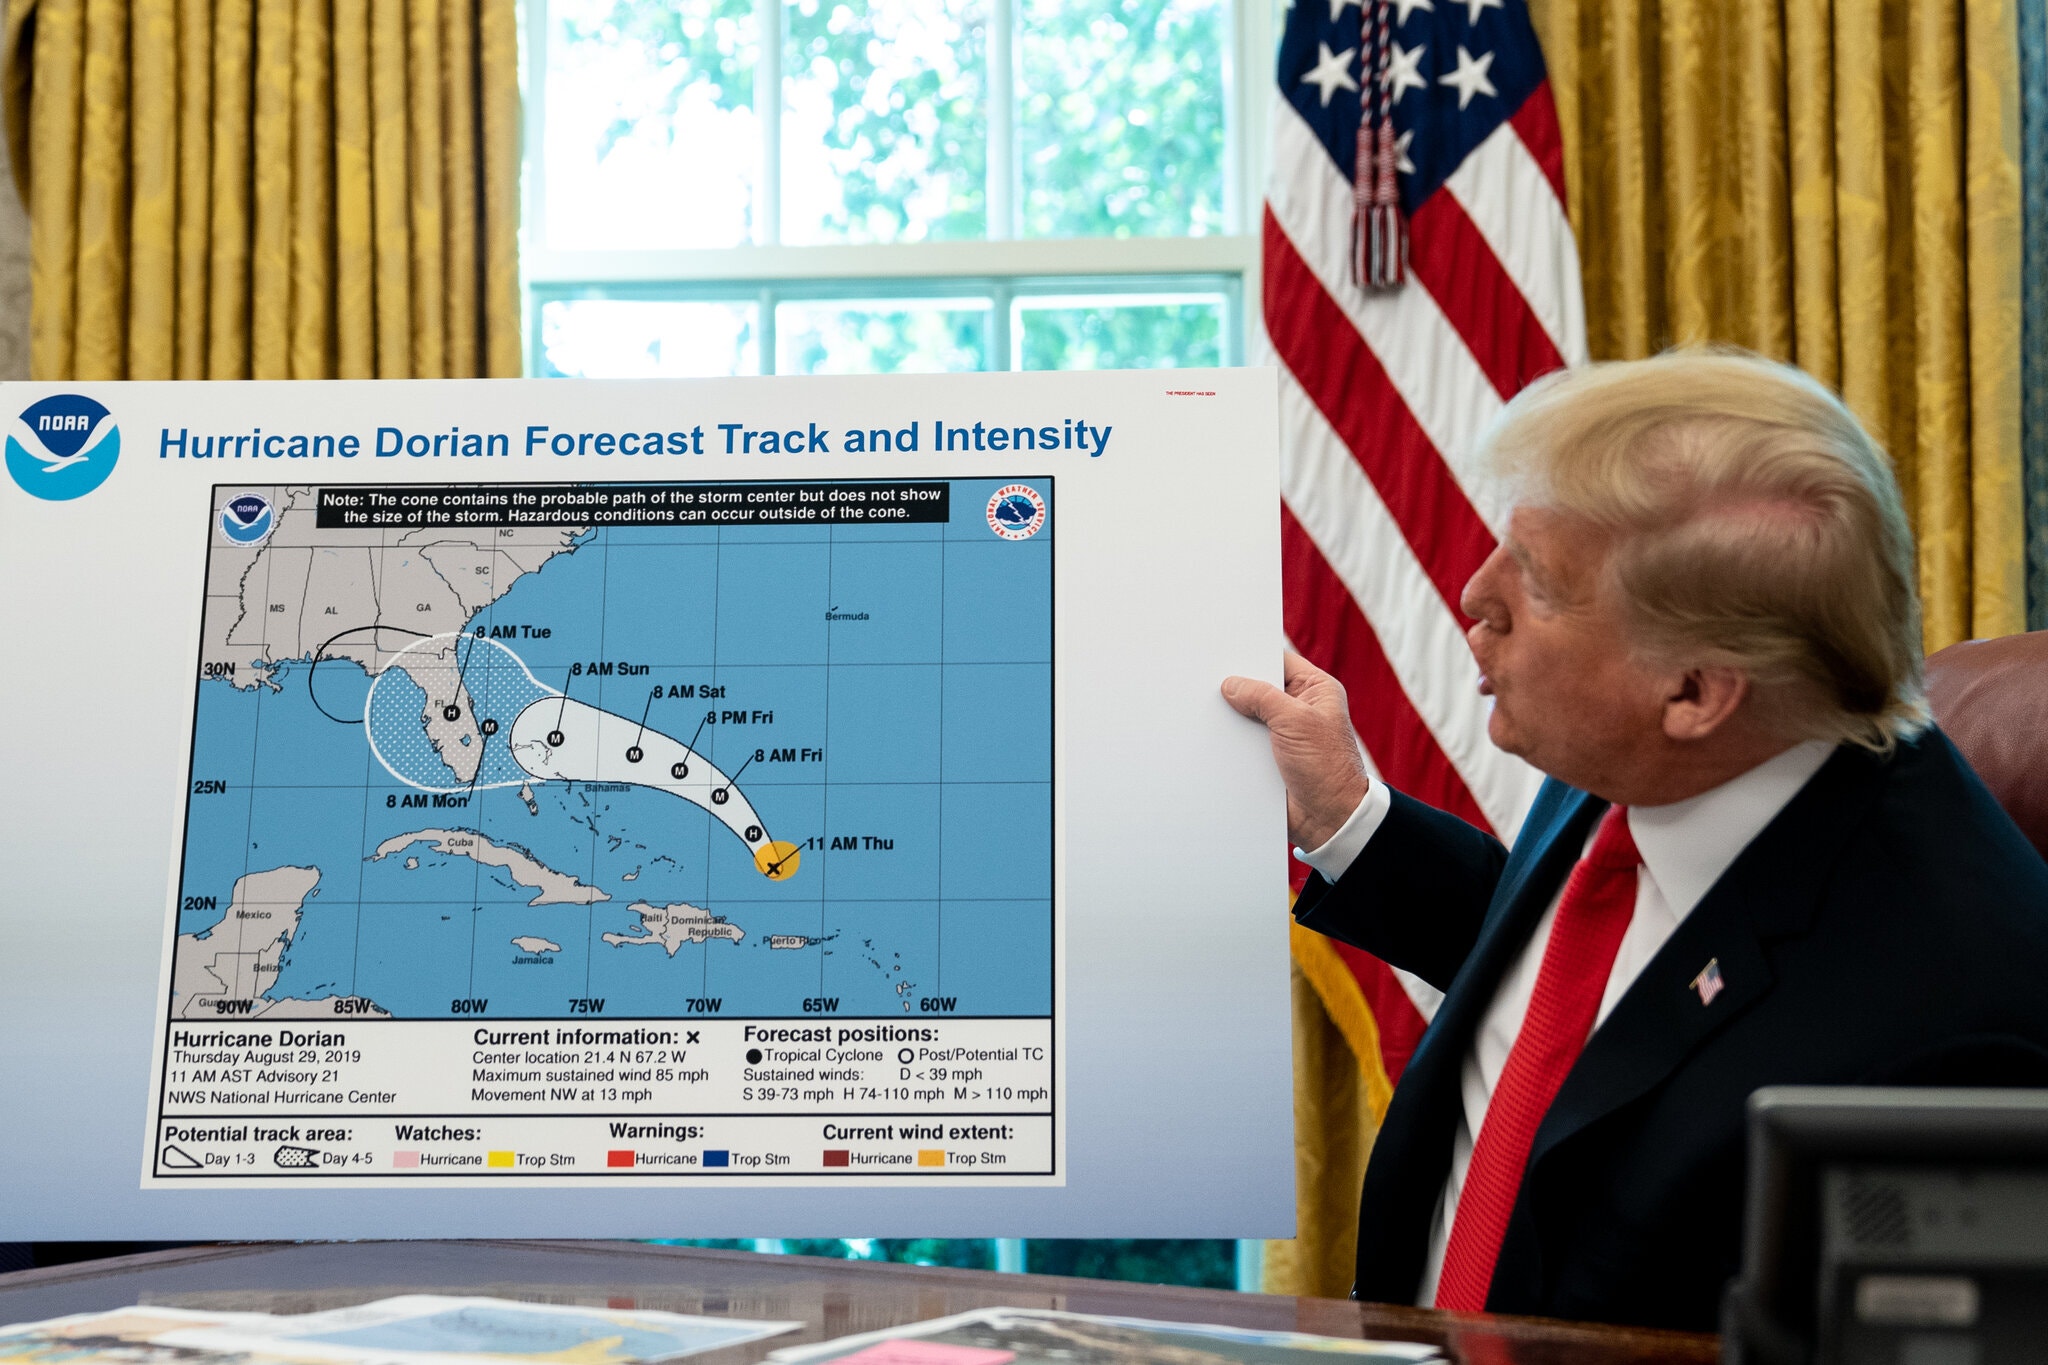 Trump refers to a map, modified using a Sharpie, while talking to reporters following a briefing from officials about Hurricane Dorian in the Oval Office at the White House on 4 September 2019. Trump has dismissed scientific evidence and fact numerous times, including 2019 when he displayed a map inaccurately modified to show Hurricane Dorian’s likely path. Photo: Erin Schaff / The New York Times